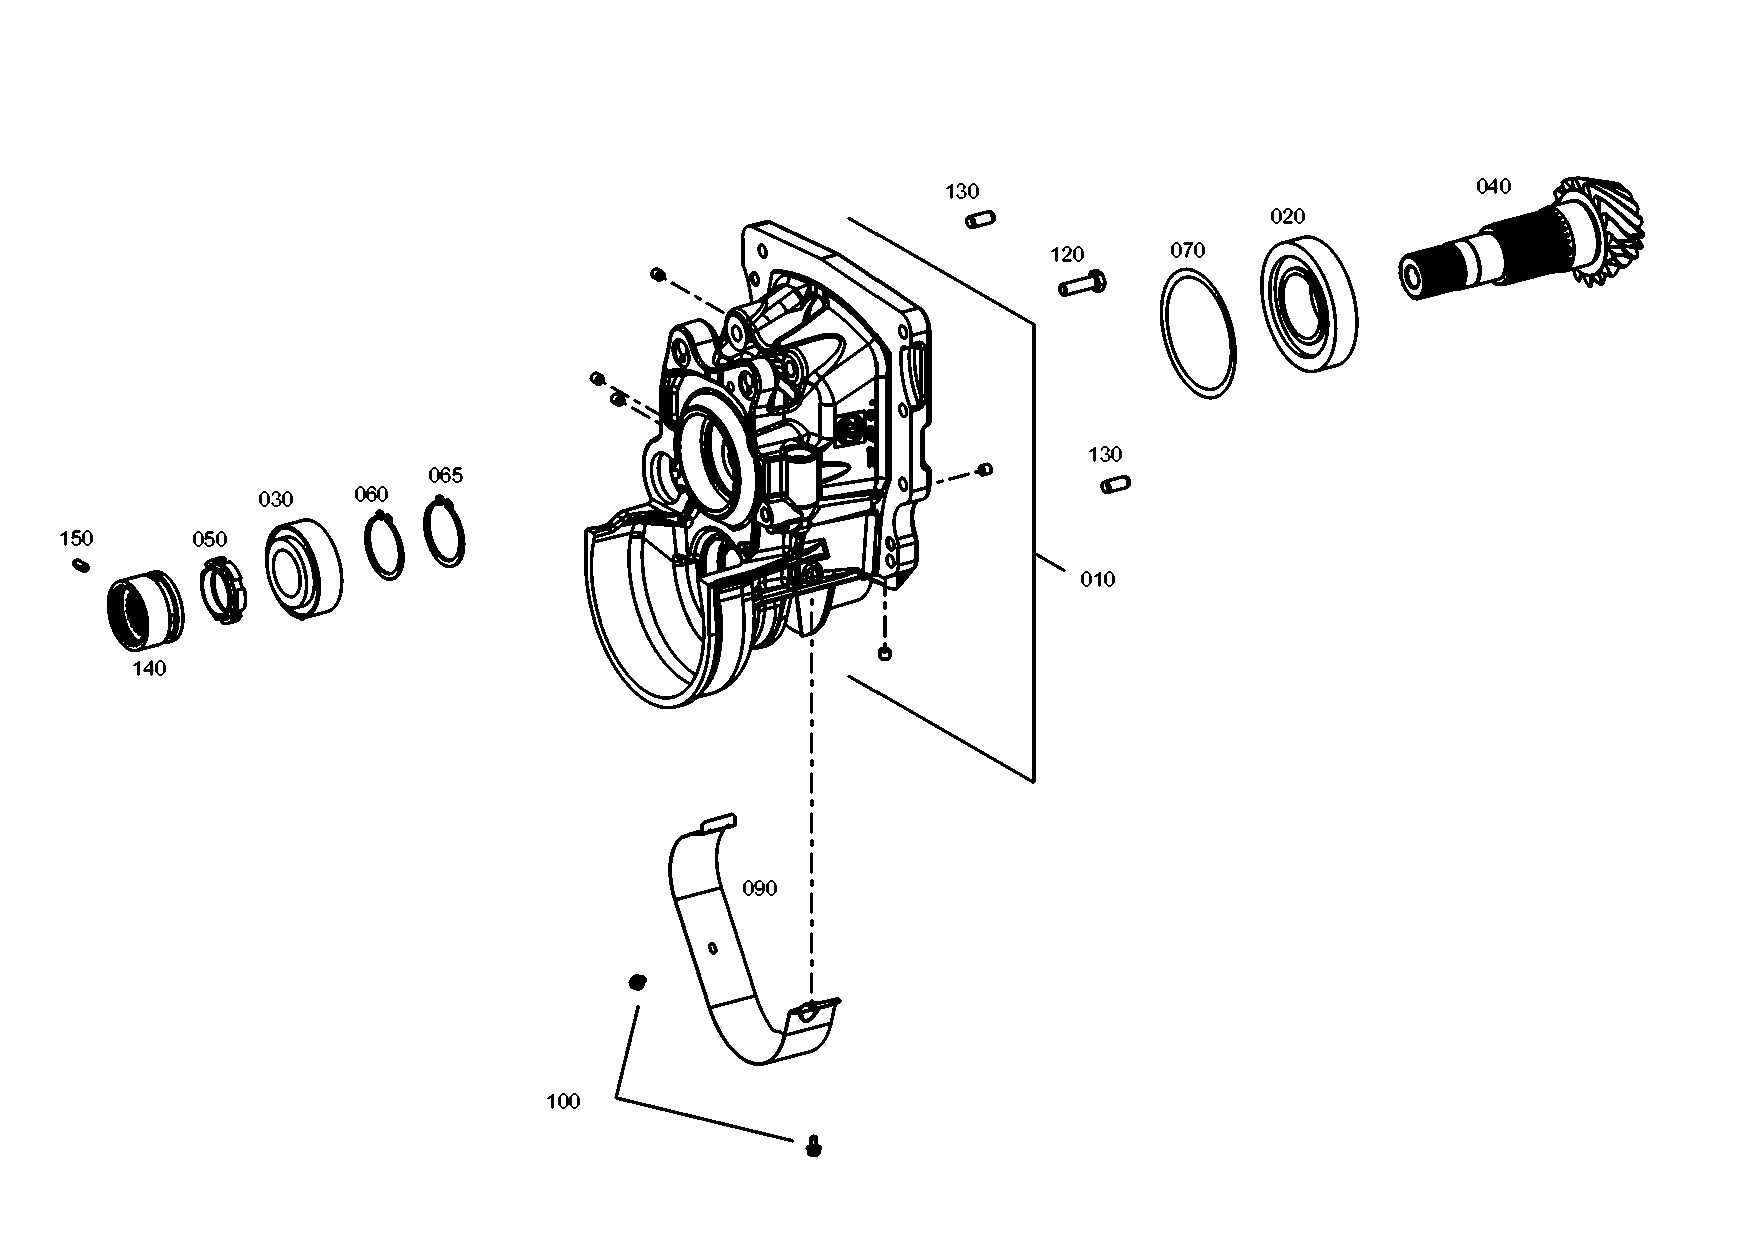 drawing for TITAN GMBH 199118250361 - ADJUSTMENT PLATE (figure 1)